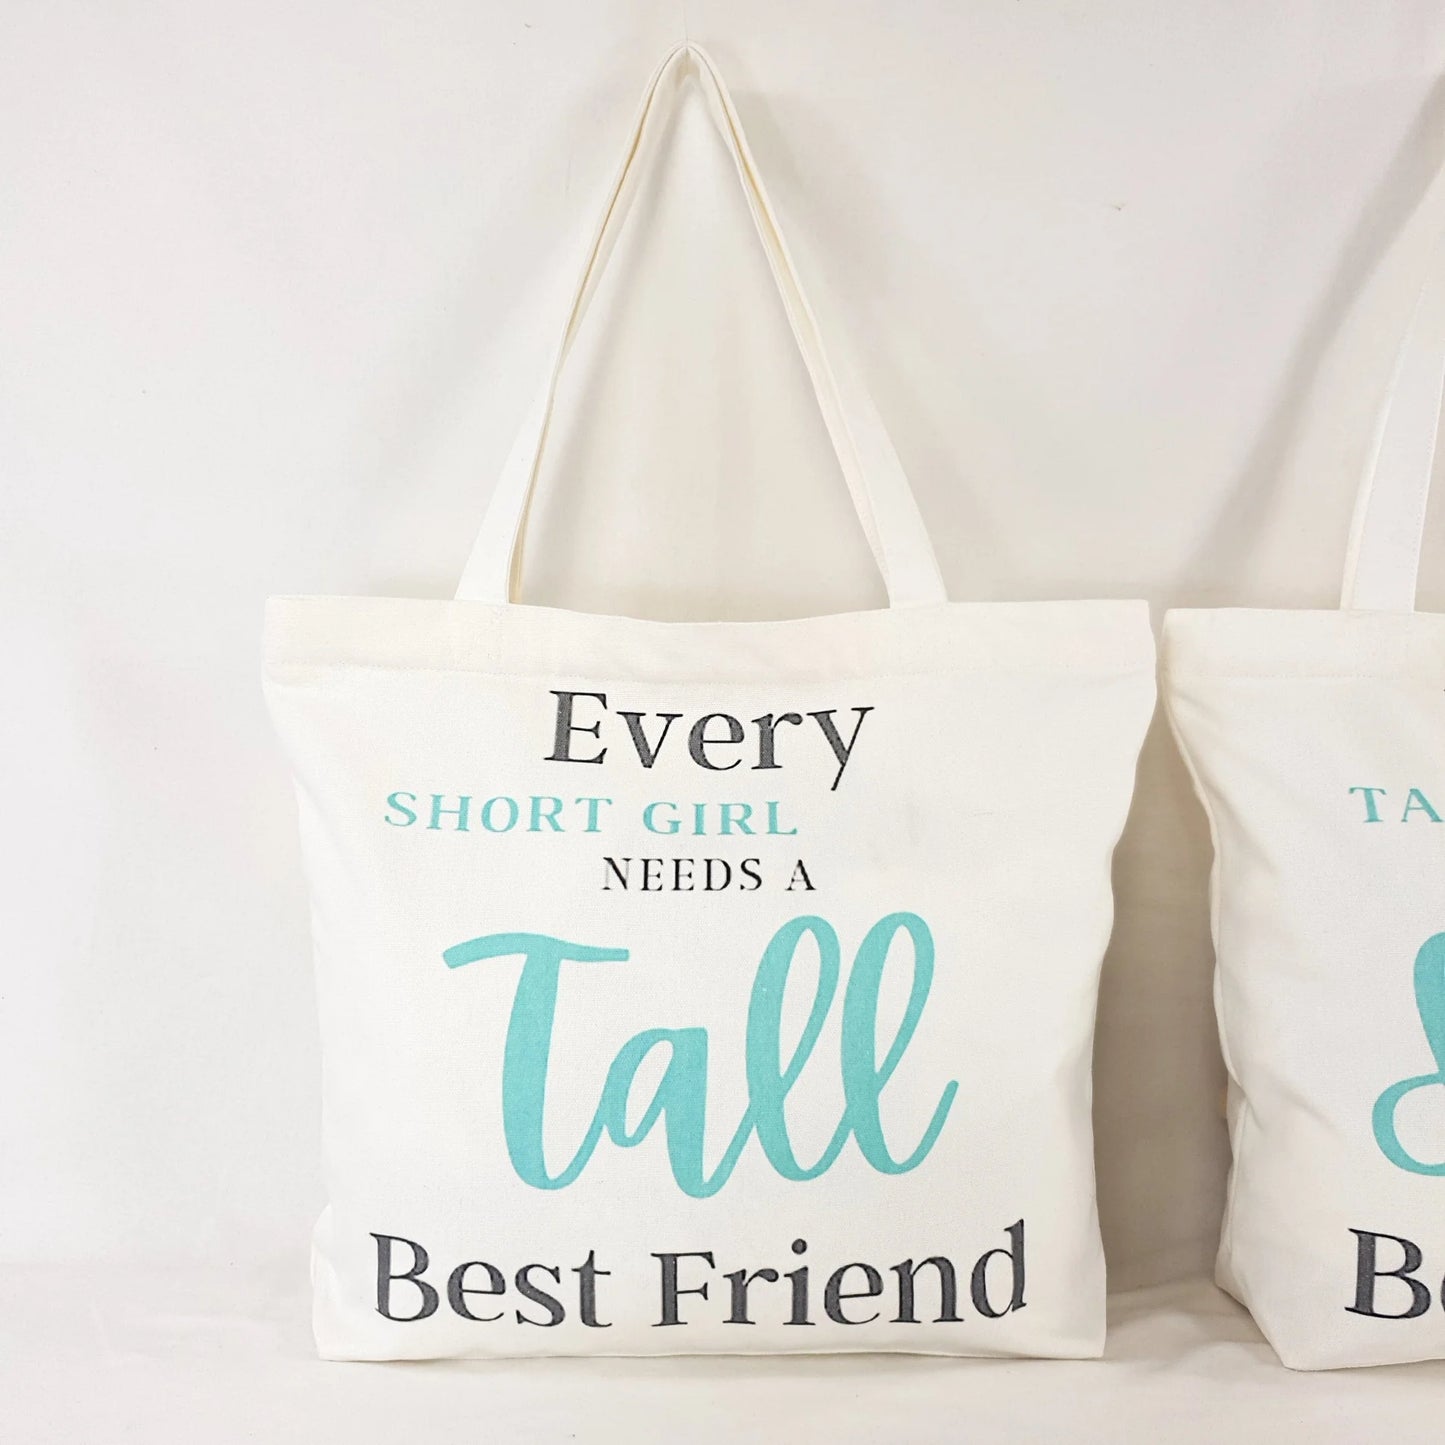 printed text reads : "Every Short girl needs a tall best friend" and the words "short girl" and "Tall" is in Teal color and rest of writing is in dark grey.  Bag itself is white with shoulder straps, zipper on the top